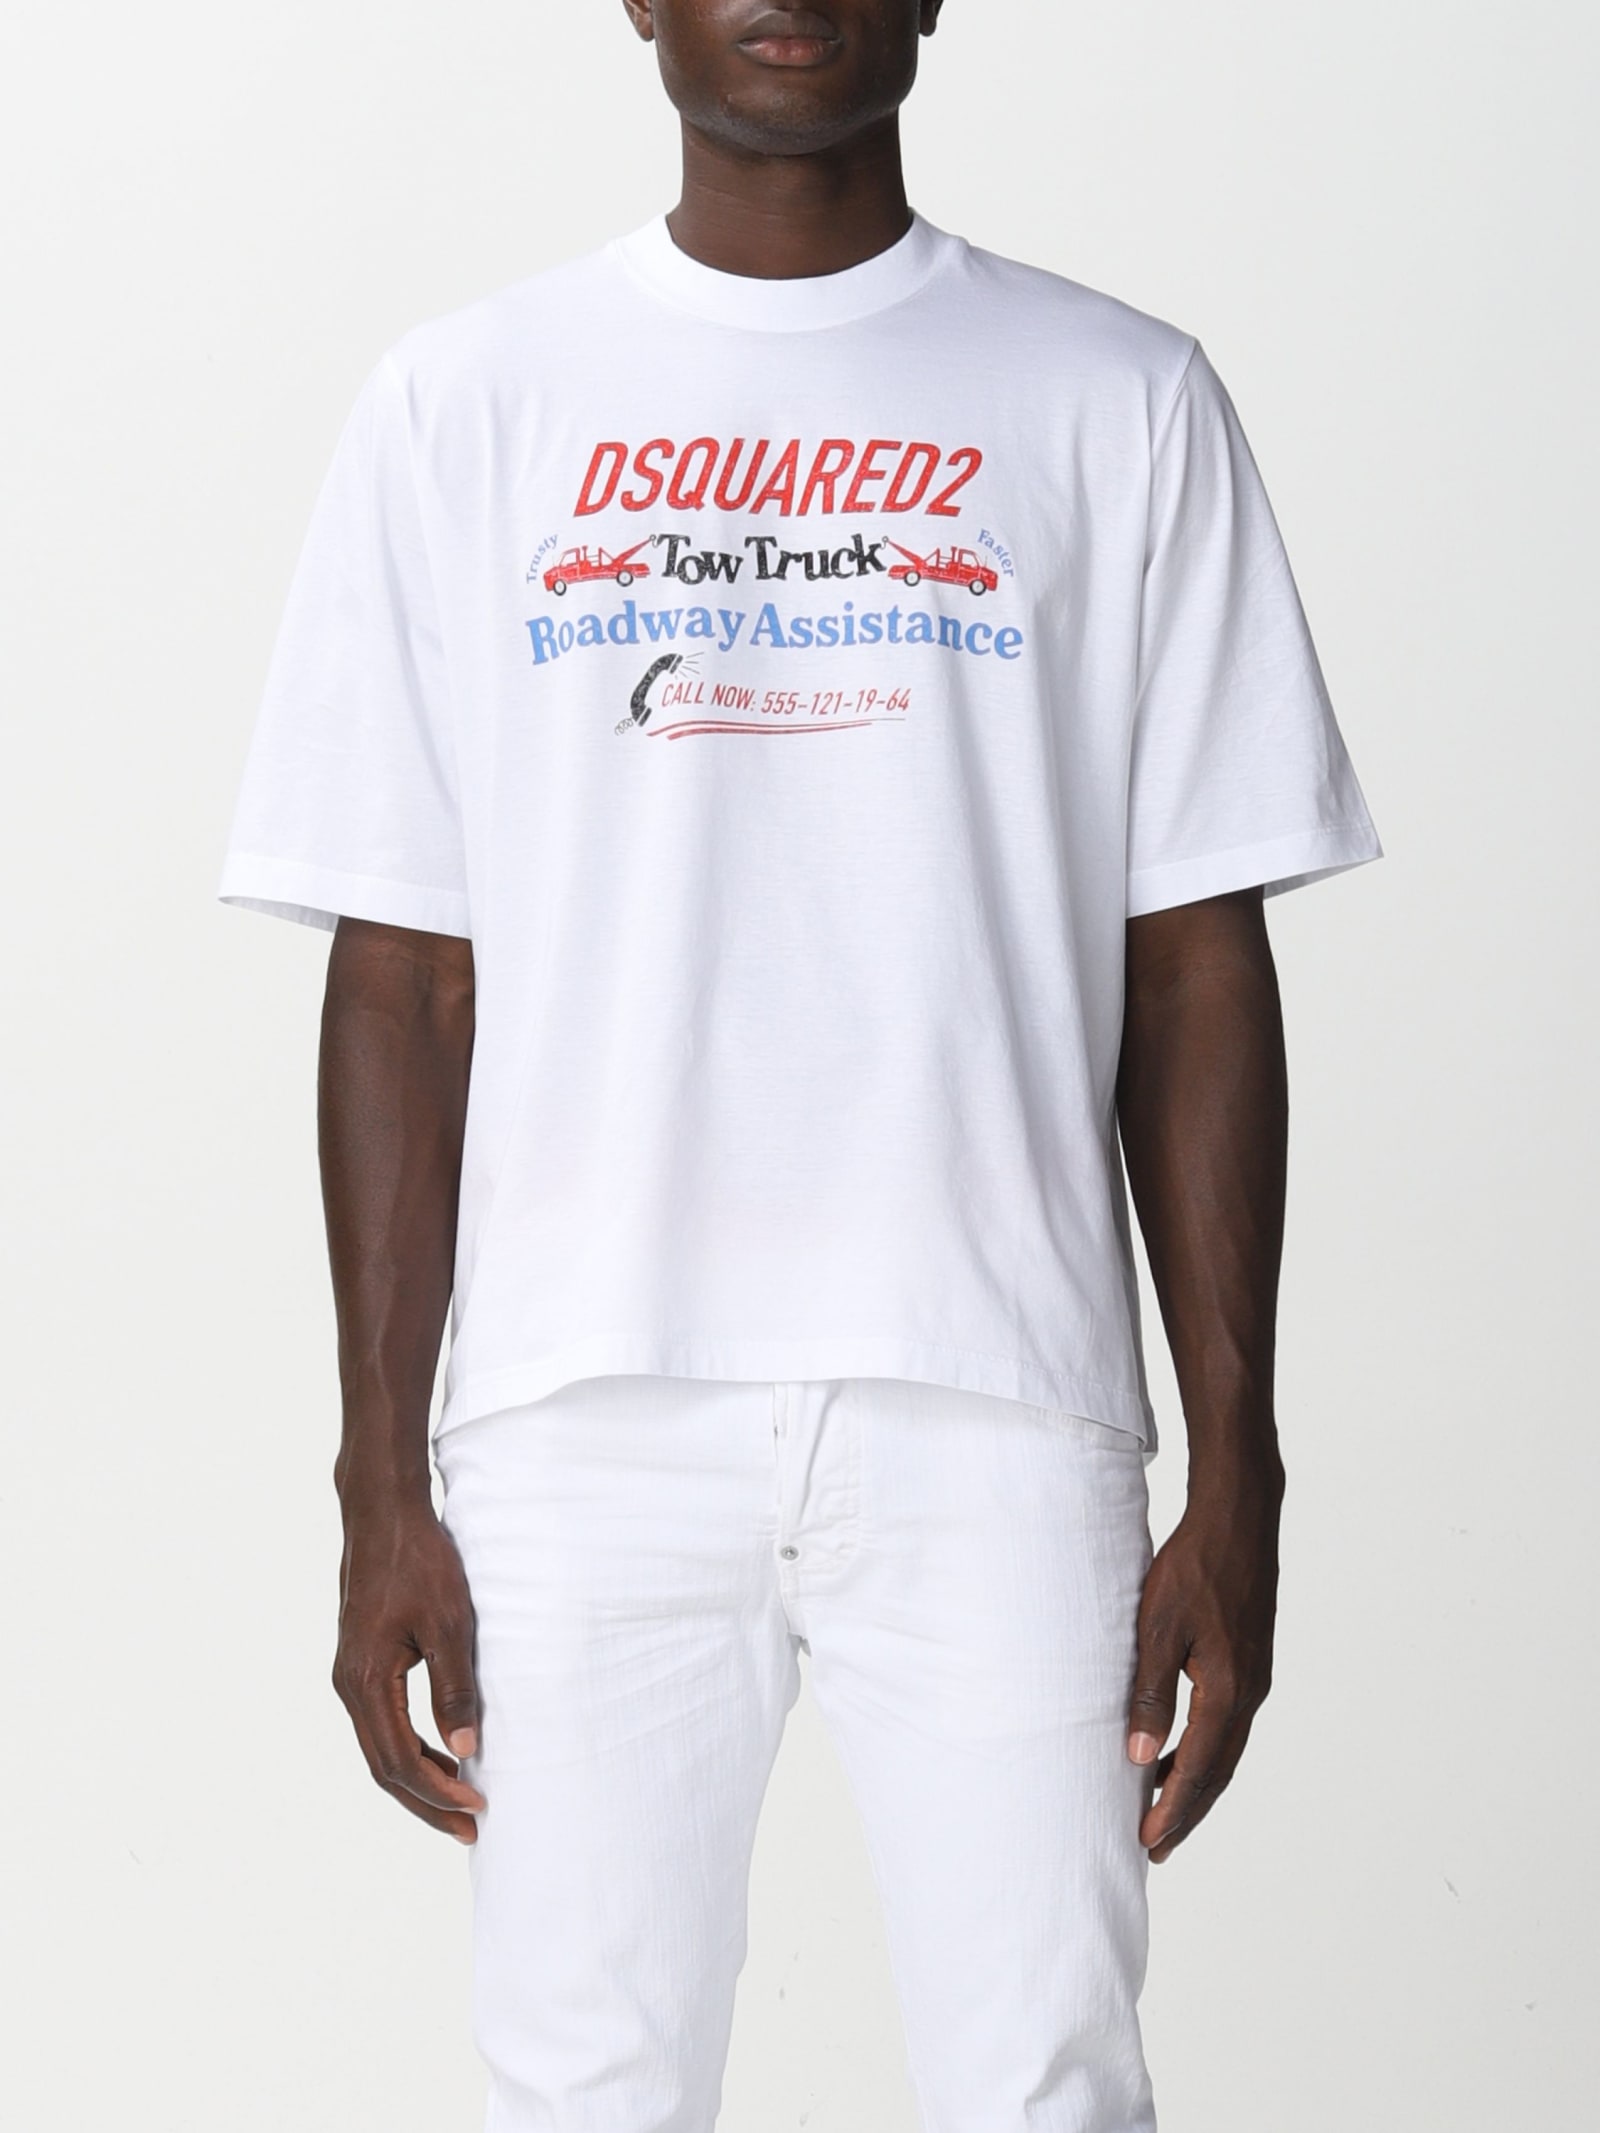 Dsquared2 Ts Tow Truck